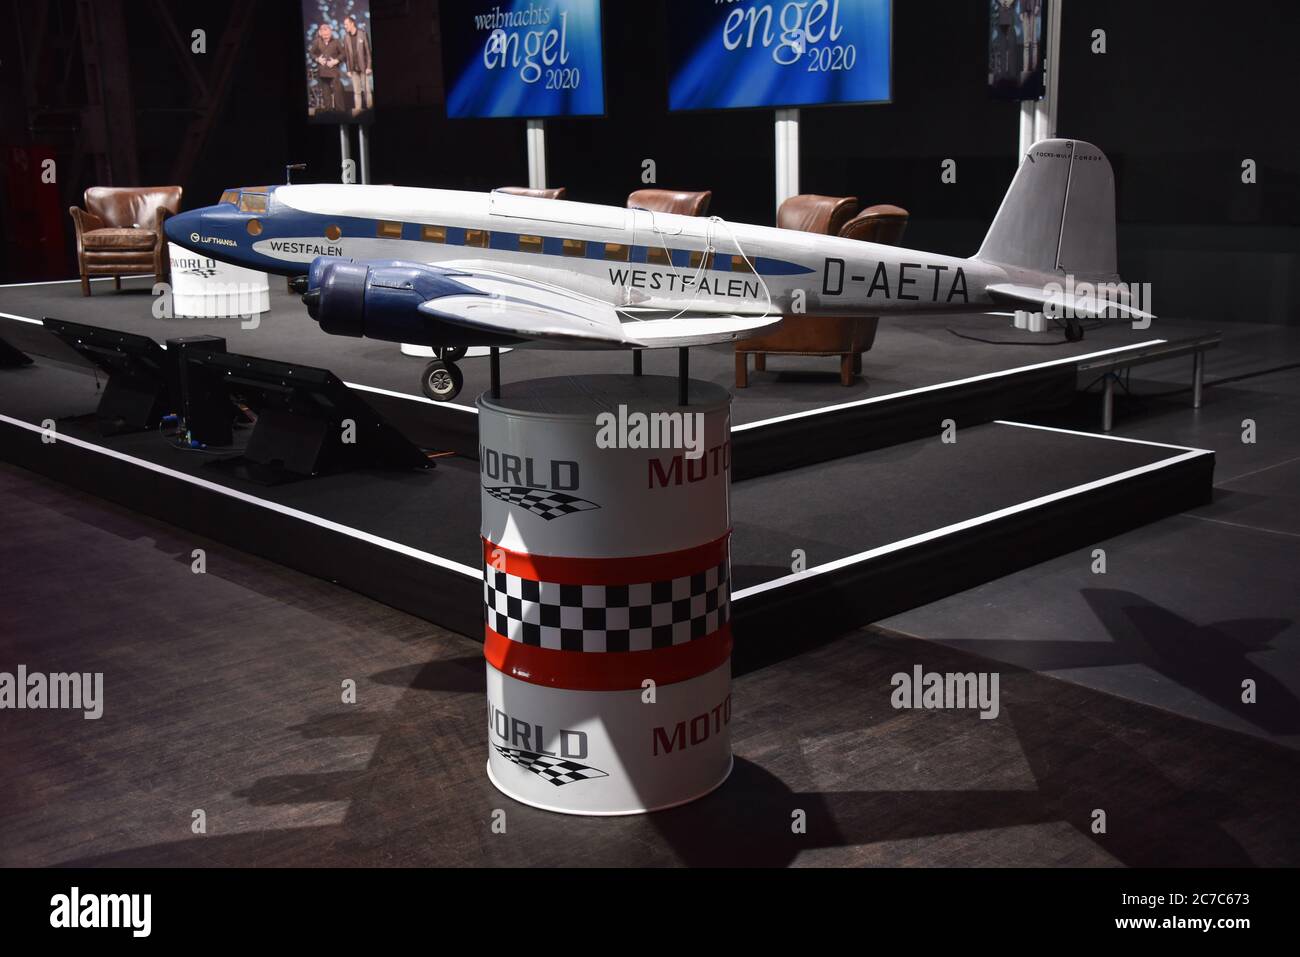 Cologne, Germany. 15th July, 2020. Model of the Focke-Wulf Fw 200 during the presentation of the safety and hygiene concept of the dinner show 'Christmas Angel' which will be shown from 20.11.2020. Credit: Horst Galuschka/dpa/Alamy Live News Stock Photo